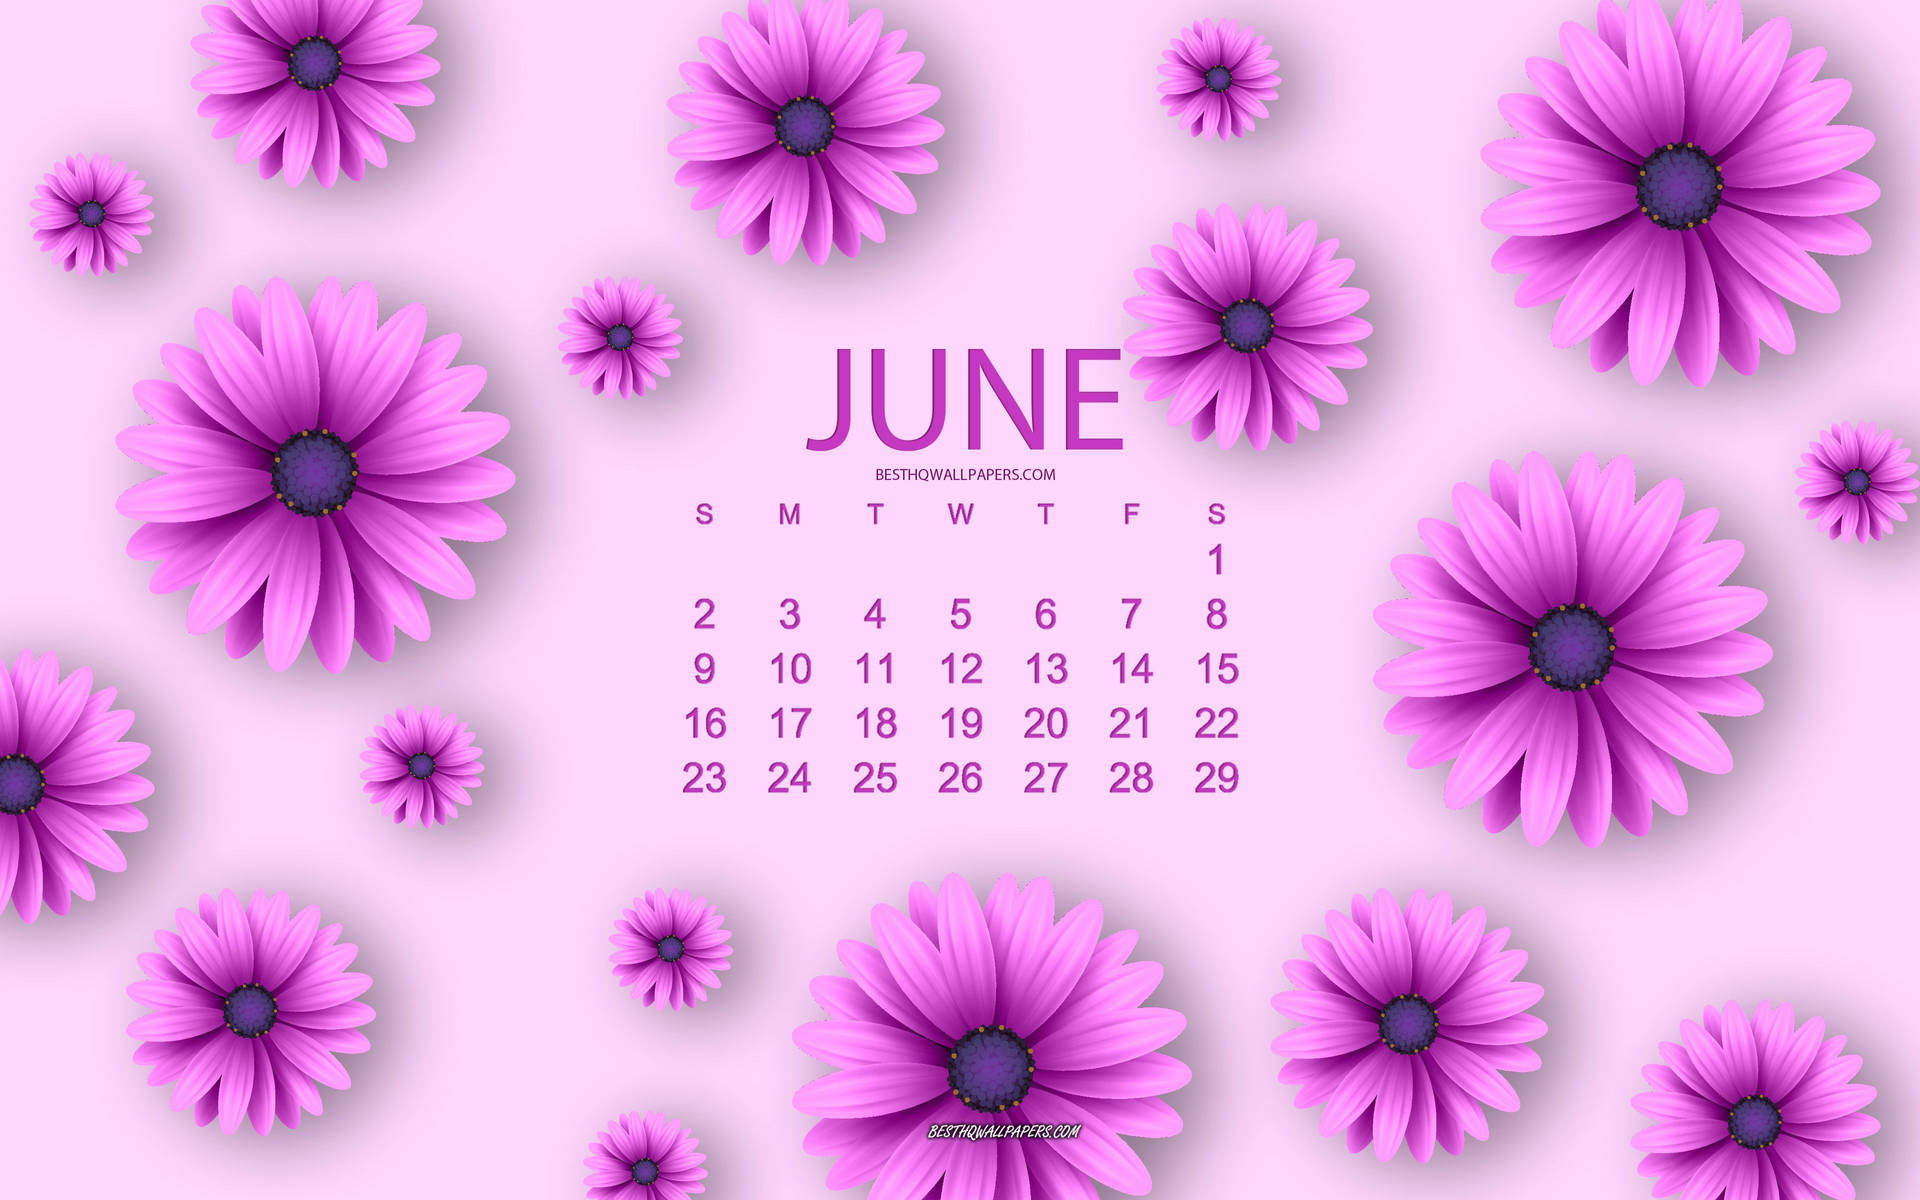 'welcome June With Blooming Lavender Fields'. Background